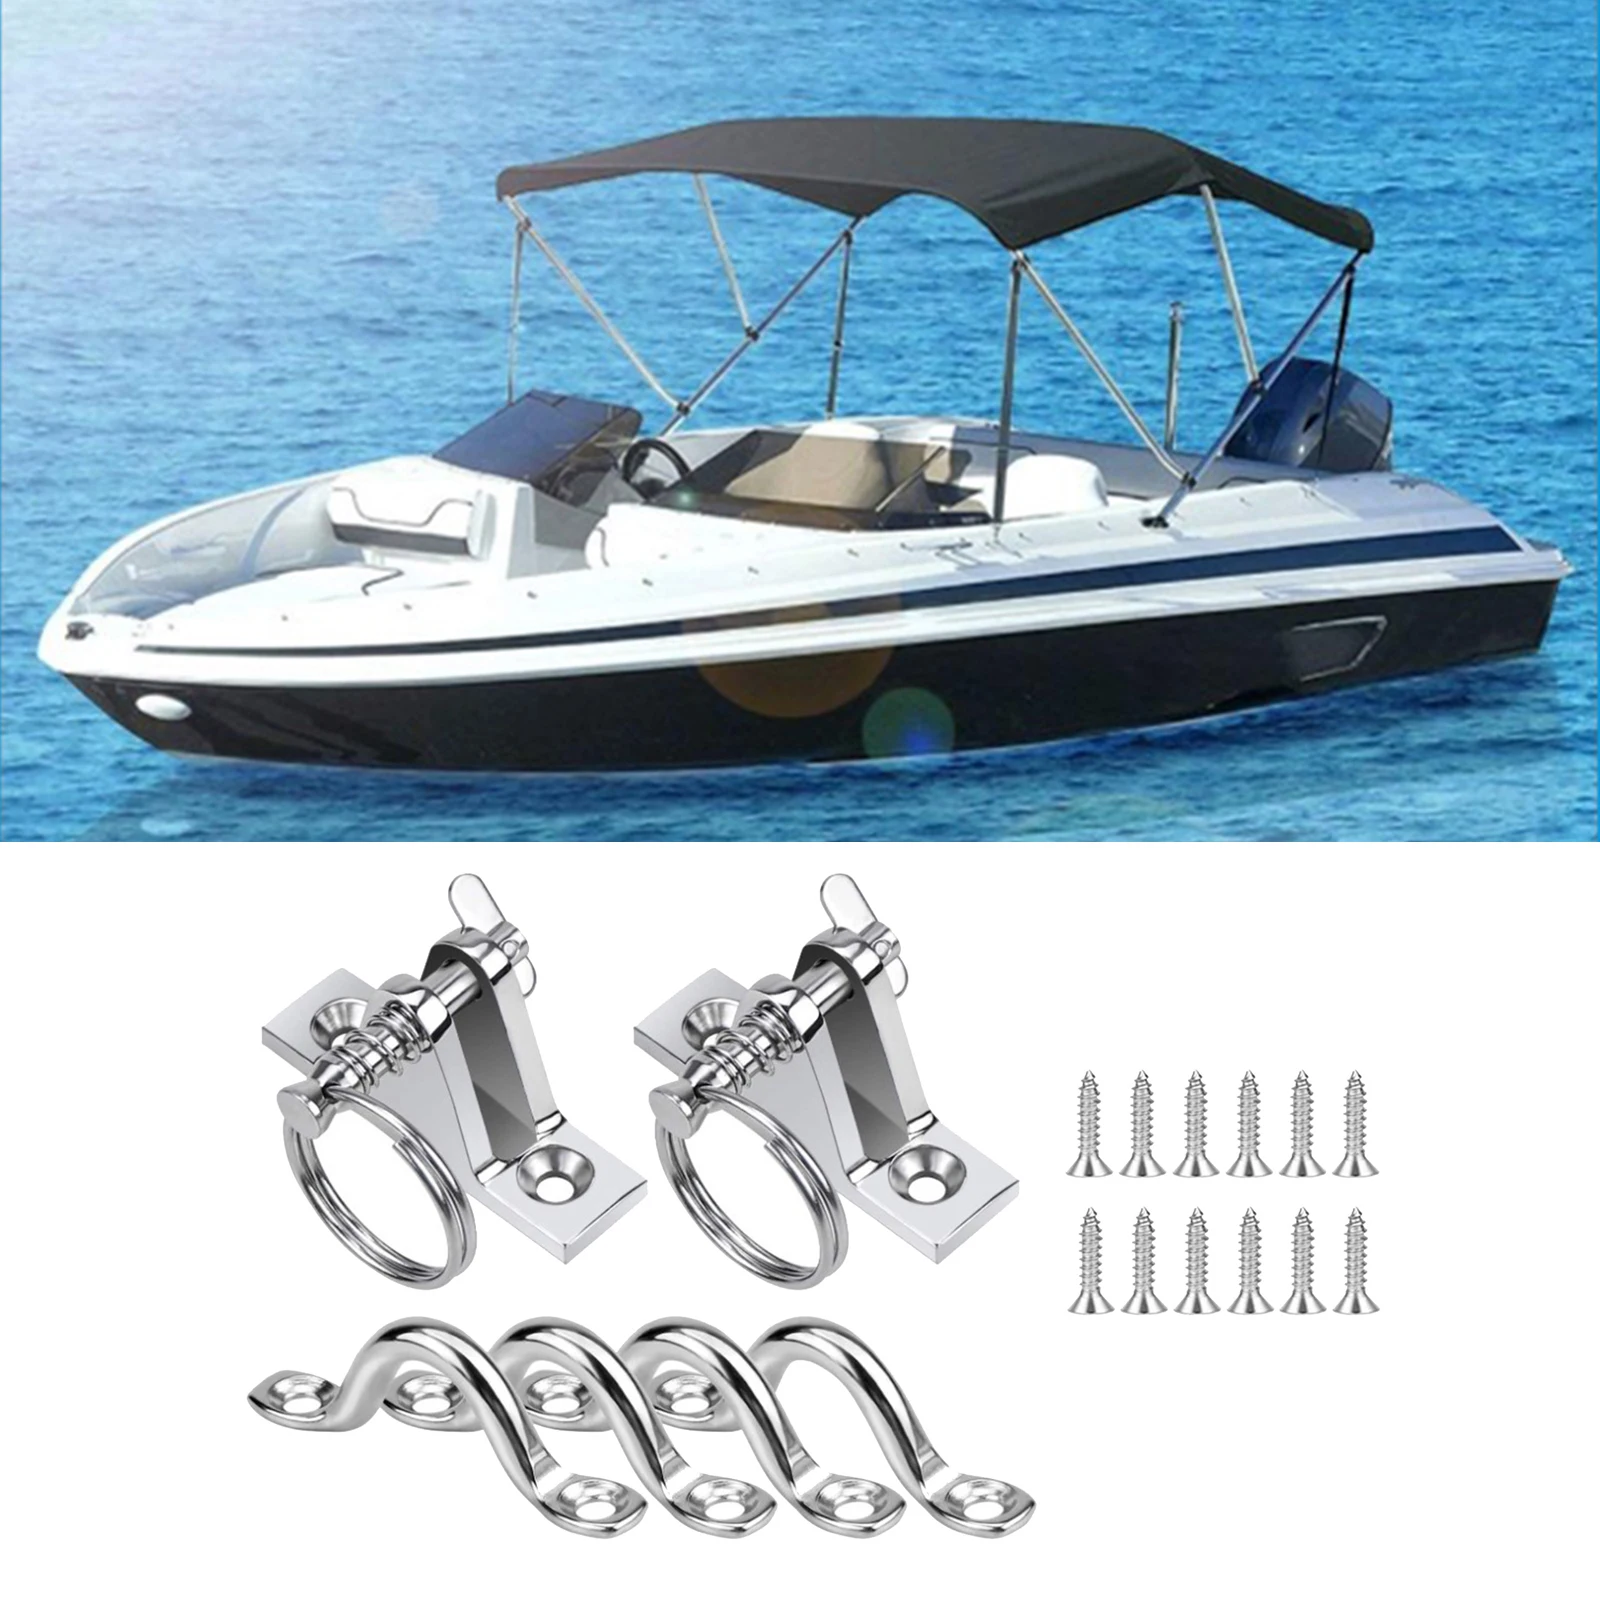 Bimini Boat Top 90 Deck Hinge 3/8 Inch Pad Eye Straps Marine Hardware Sets Strong Corrosion Resistance And Durable